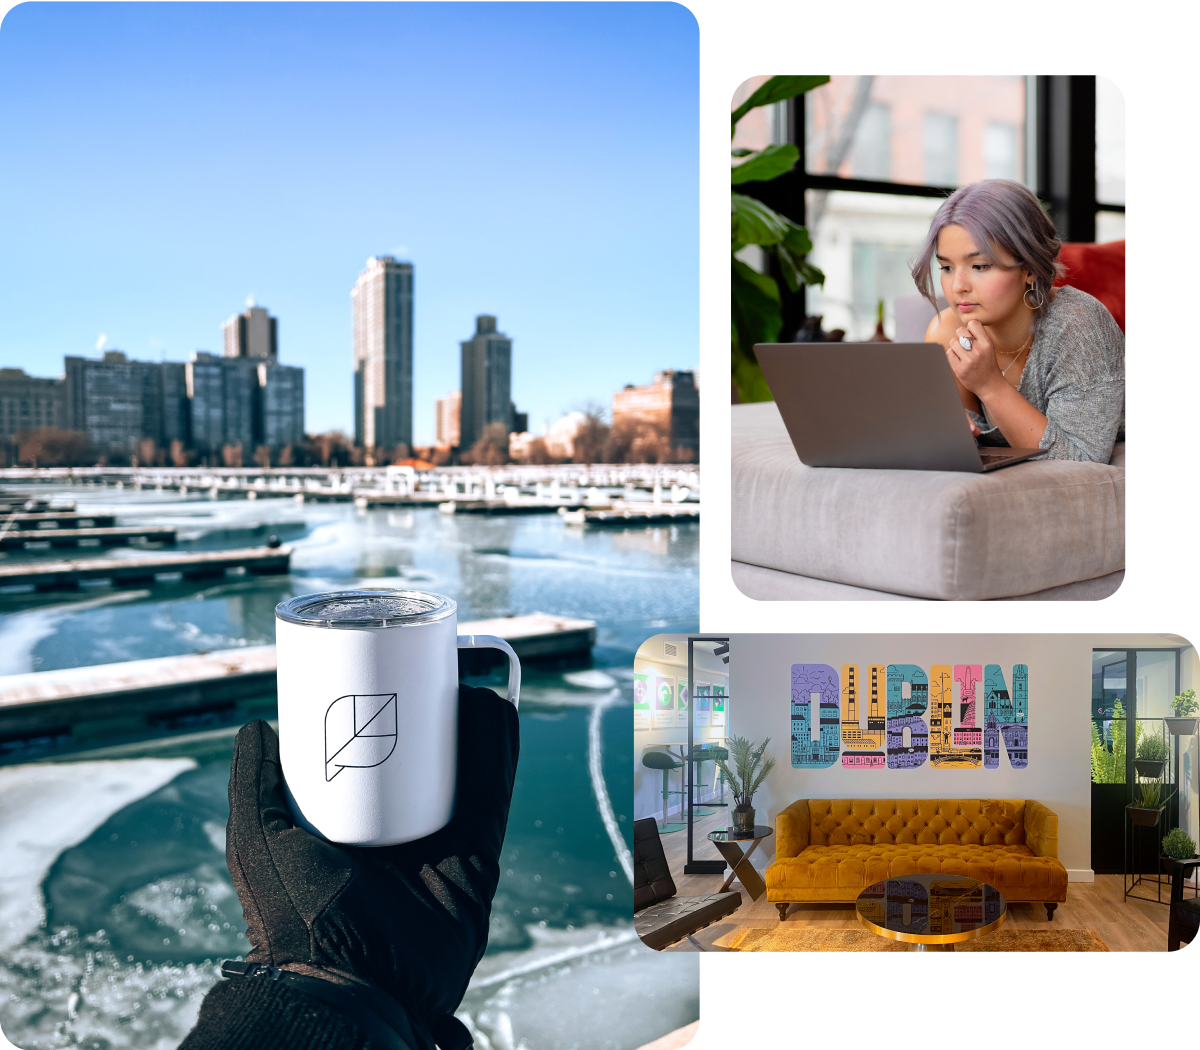 Three Sprout employee work spaces including a cozy home set up, stylish Dublin office and harbor-side view of the Seattle skyline.